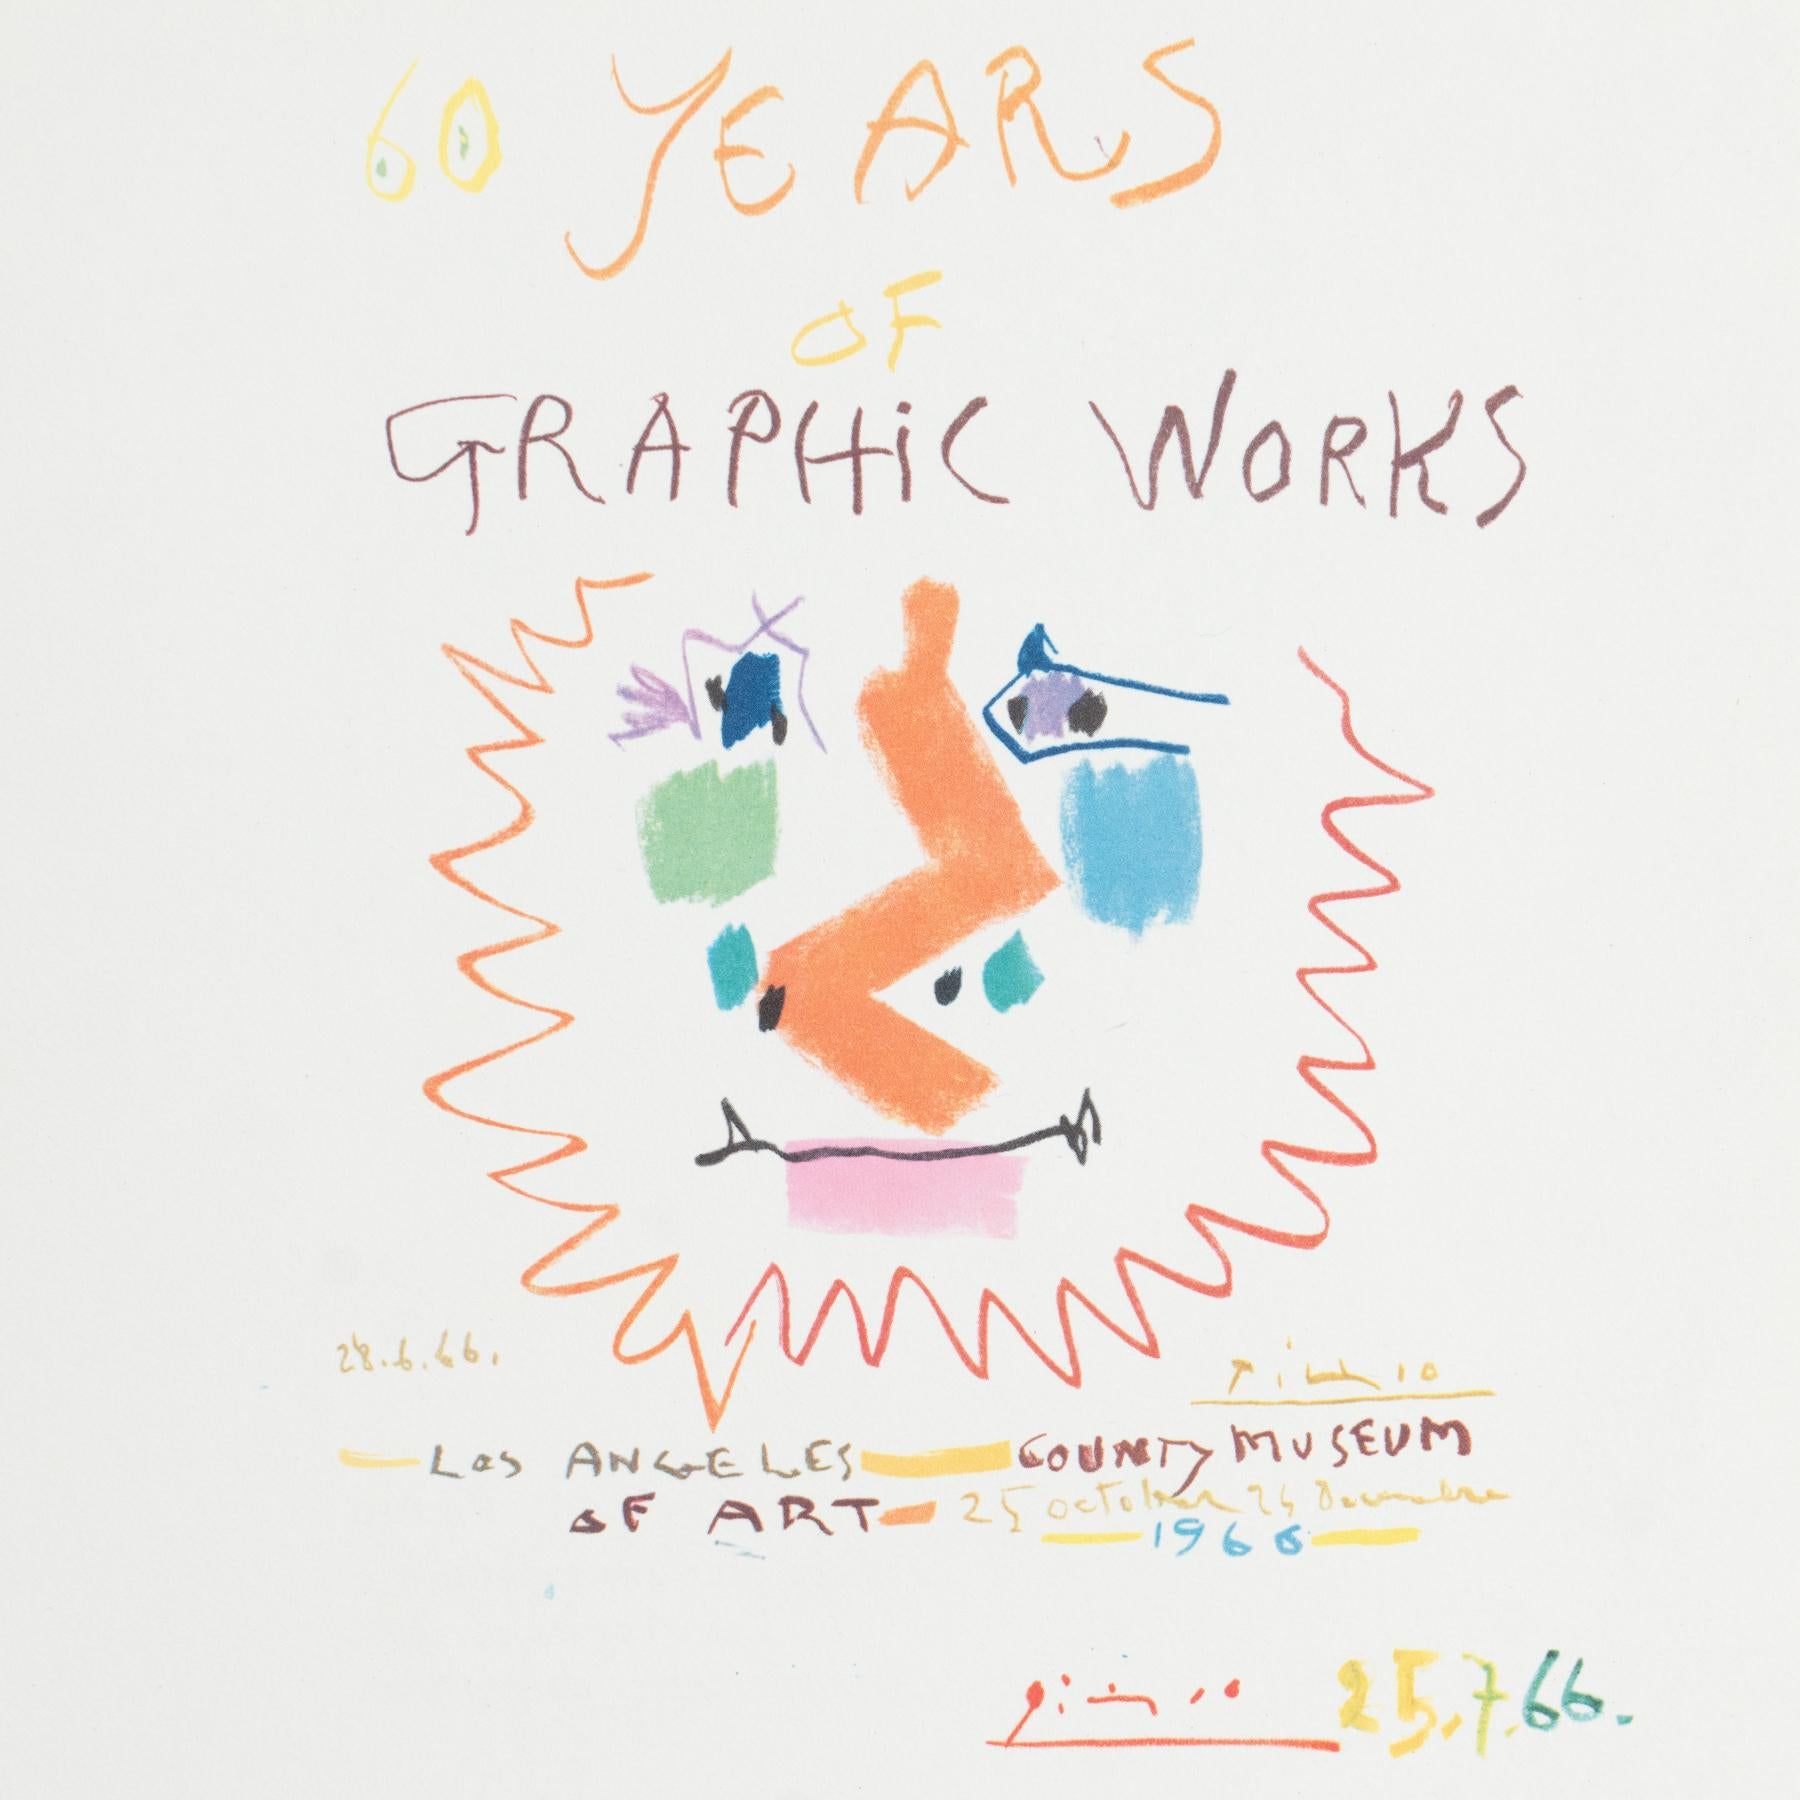 Mid-Century Modern Picasso Lithography, '60 Years Graphic Works', 1966